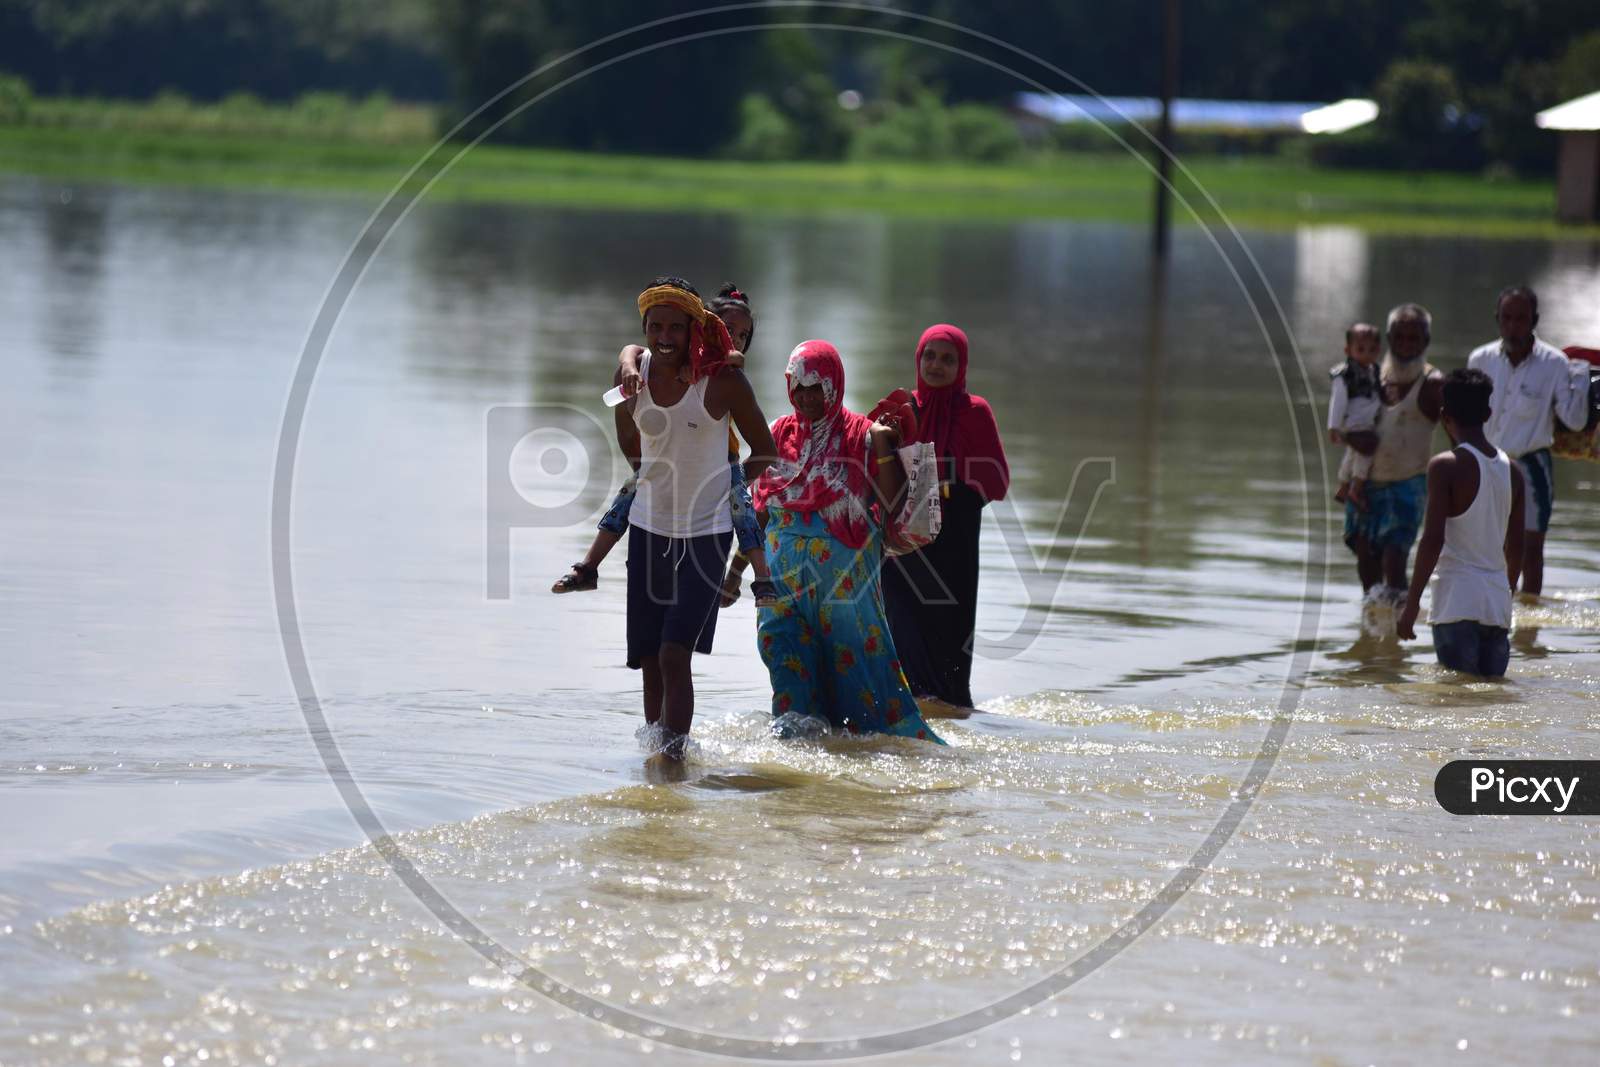 Villagers wade through a flooded road after heavy rain at  Jamunamukh  village in Hojai district of Assam on sep 29,2020.